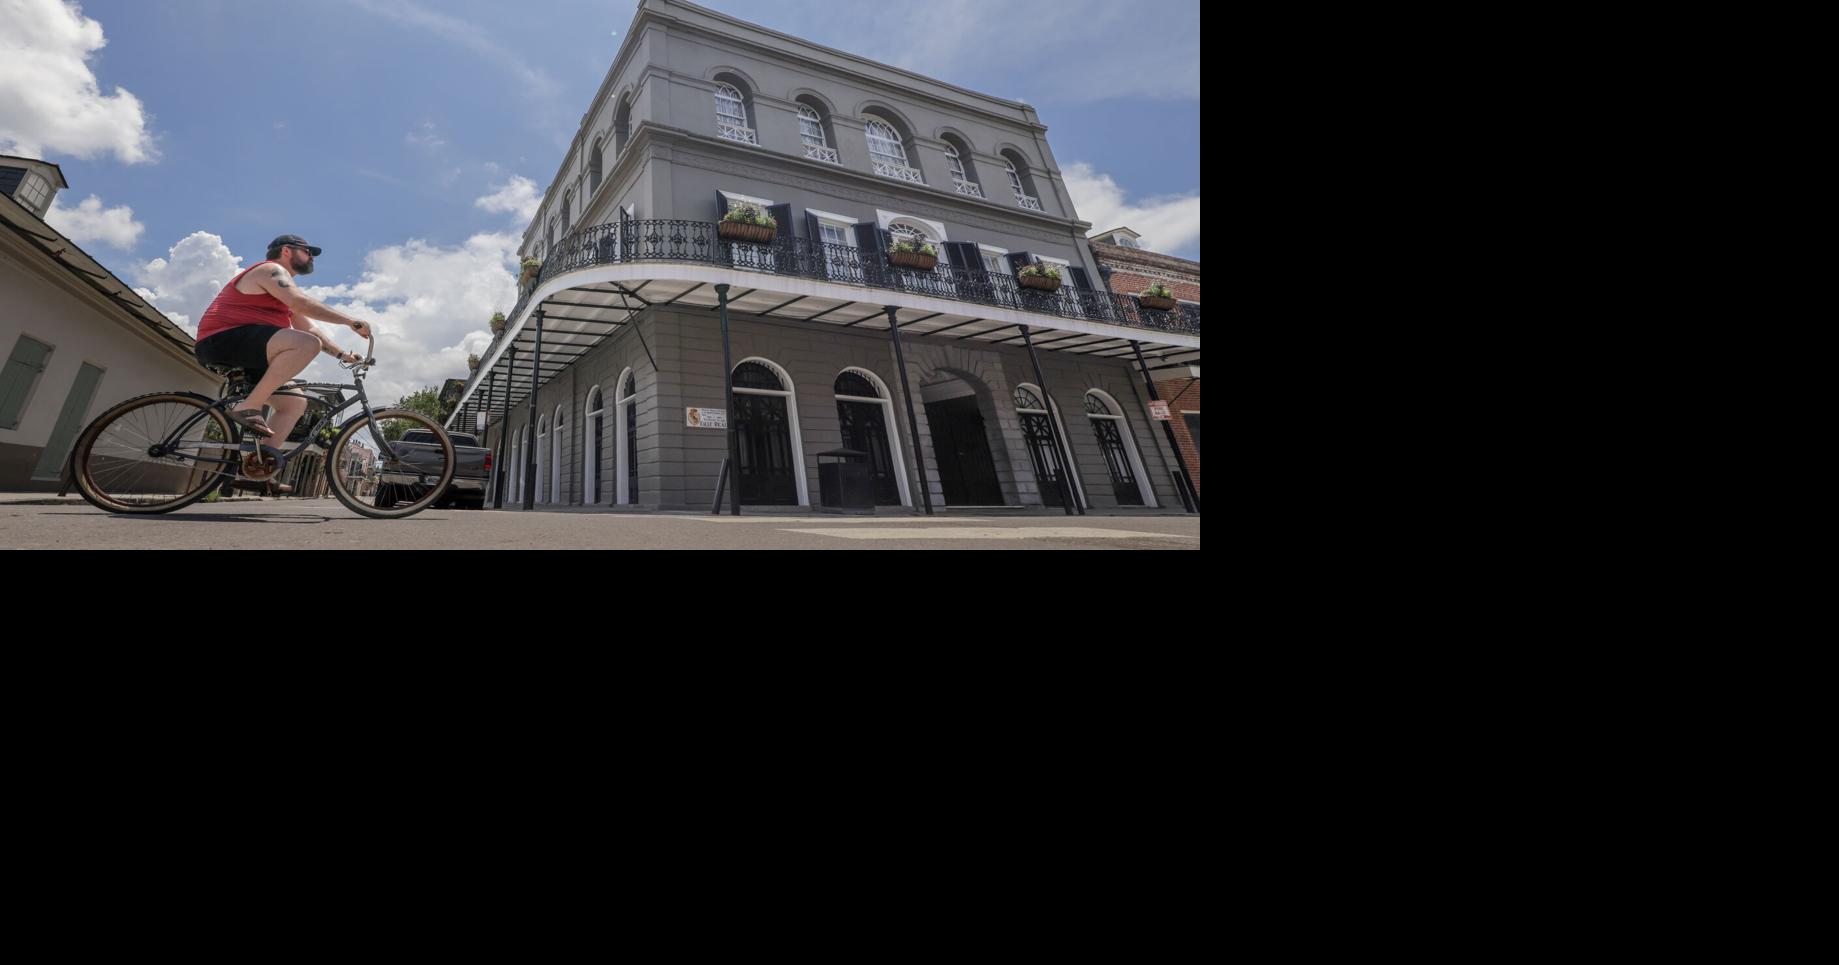 Haunted LaLaurie Mansion in New Orleans, Louisiana, for Sale | Business News